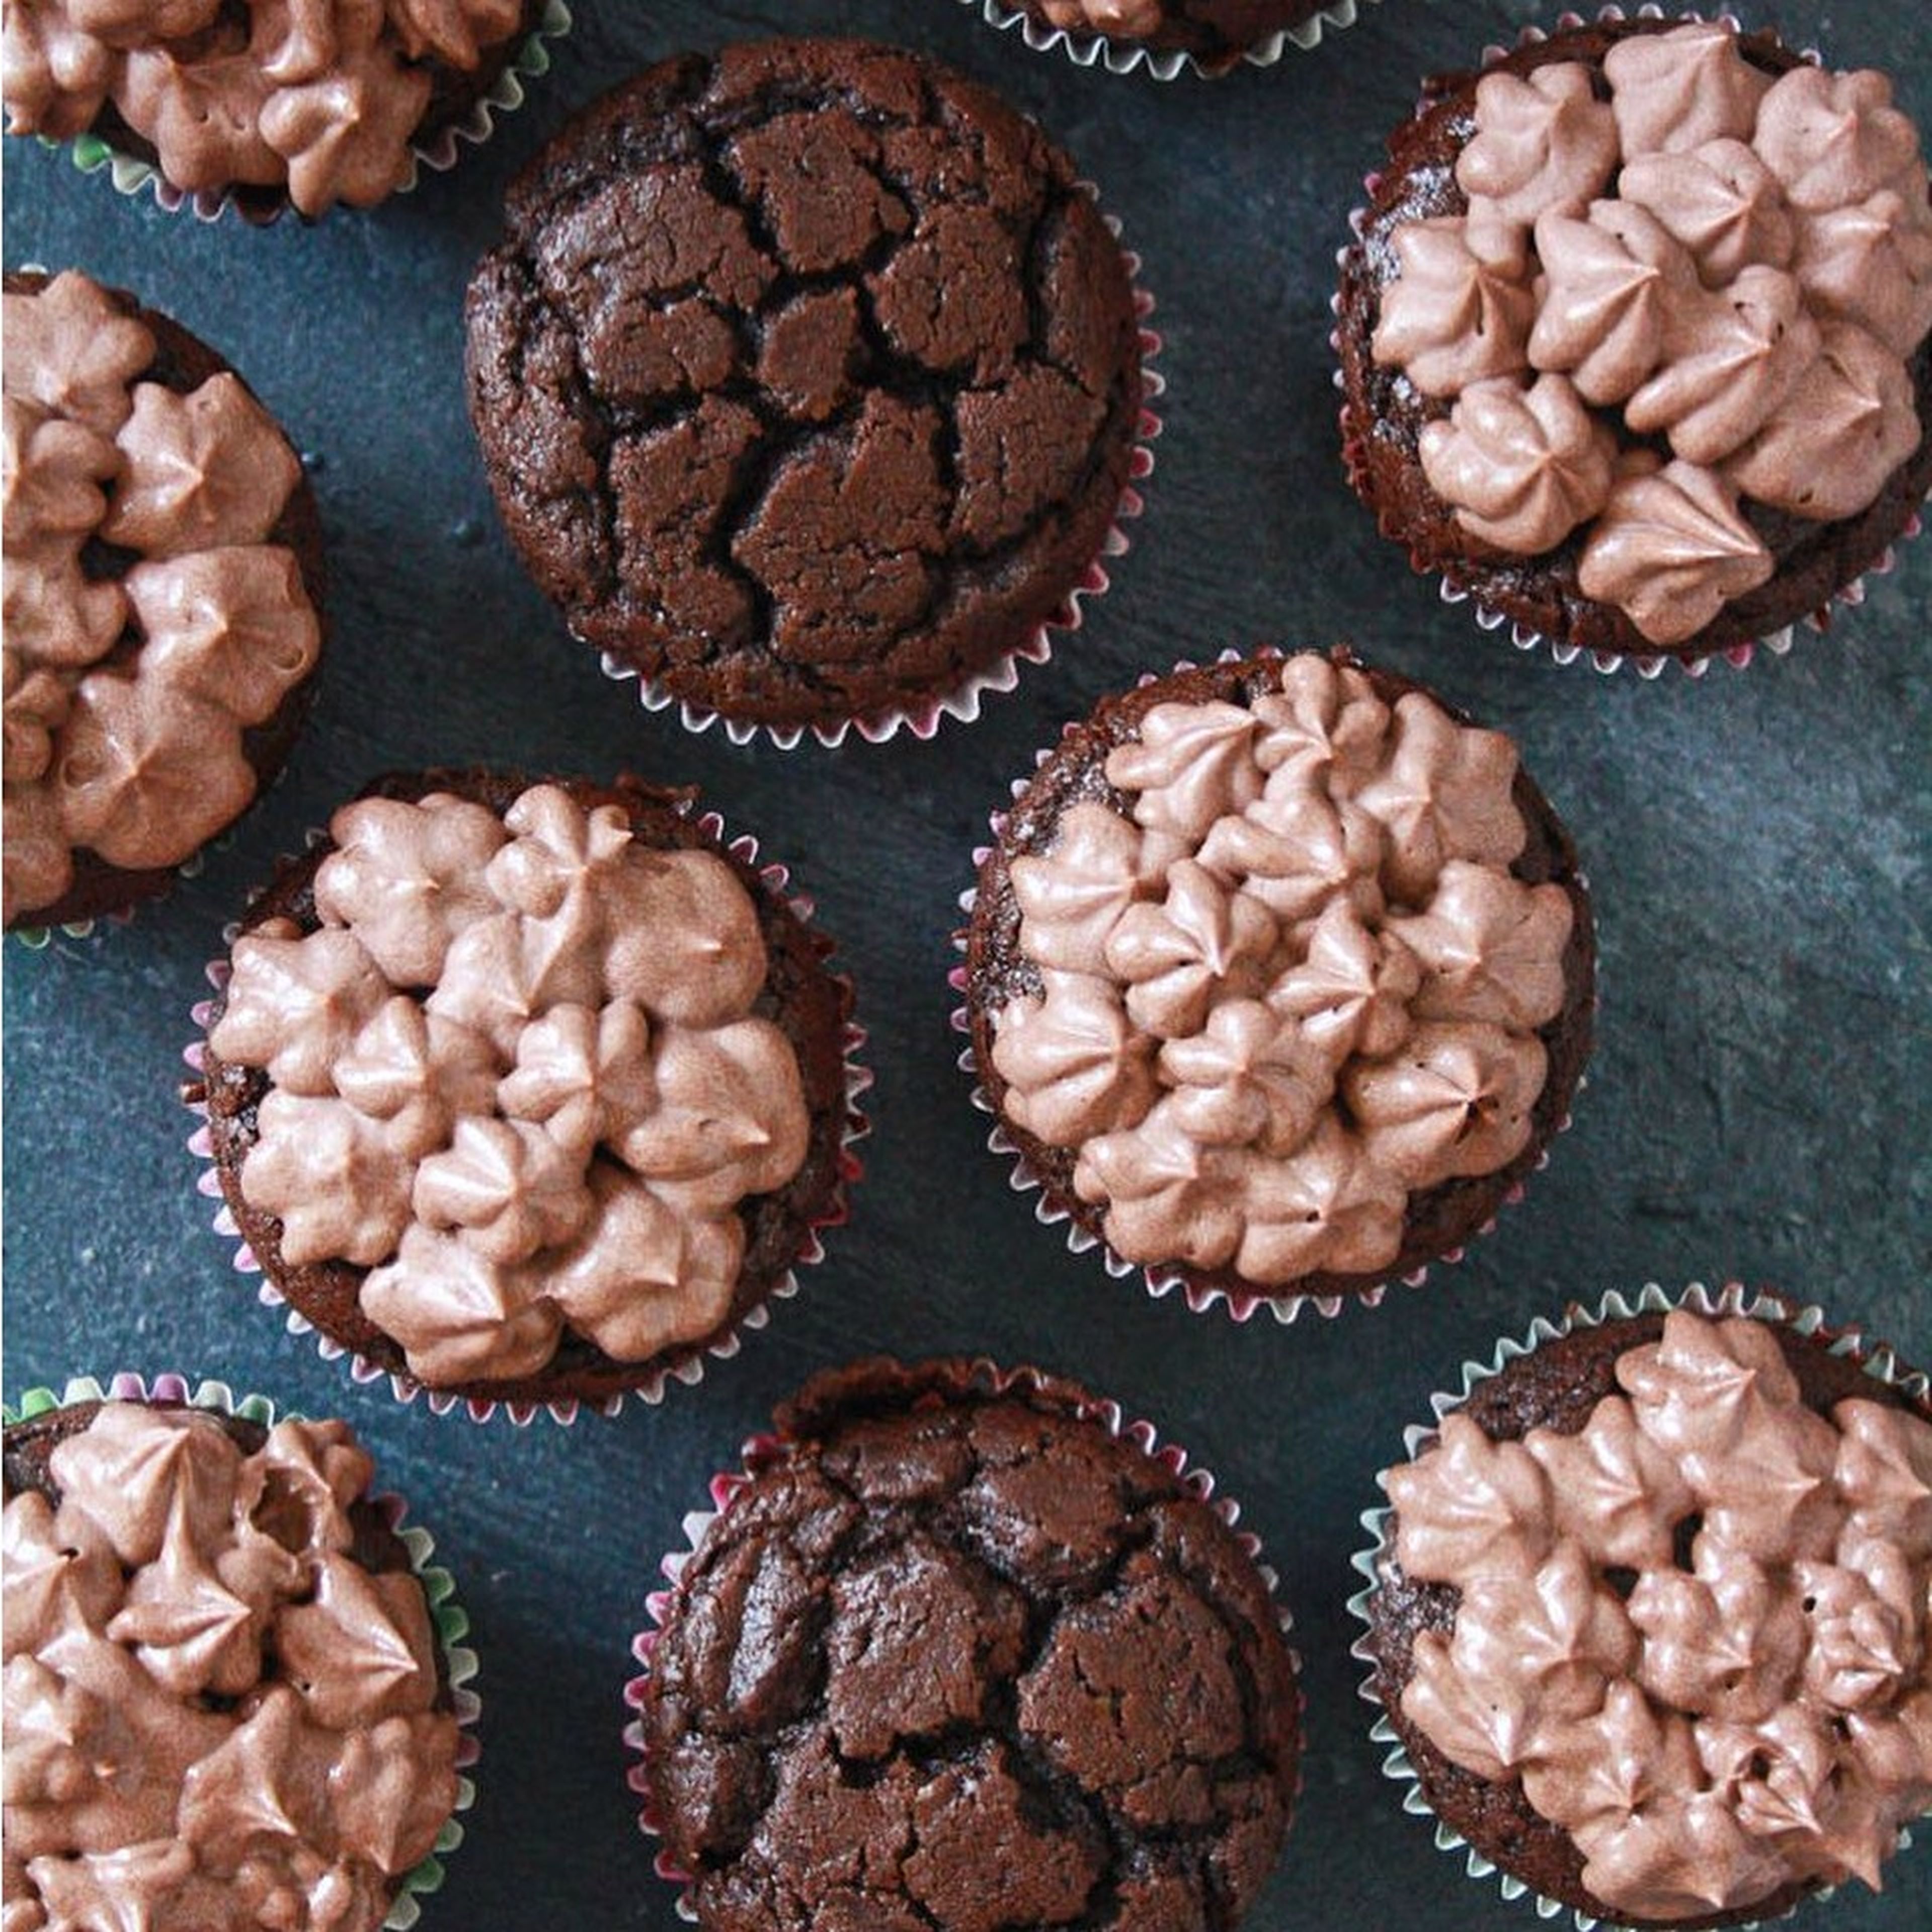 Chocolate cupcakes with mascarpone frosting